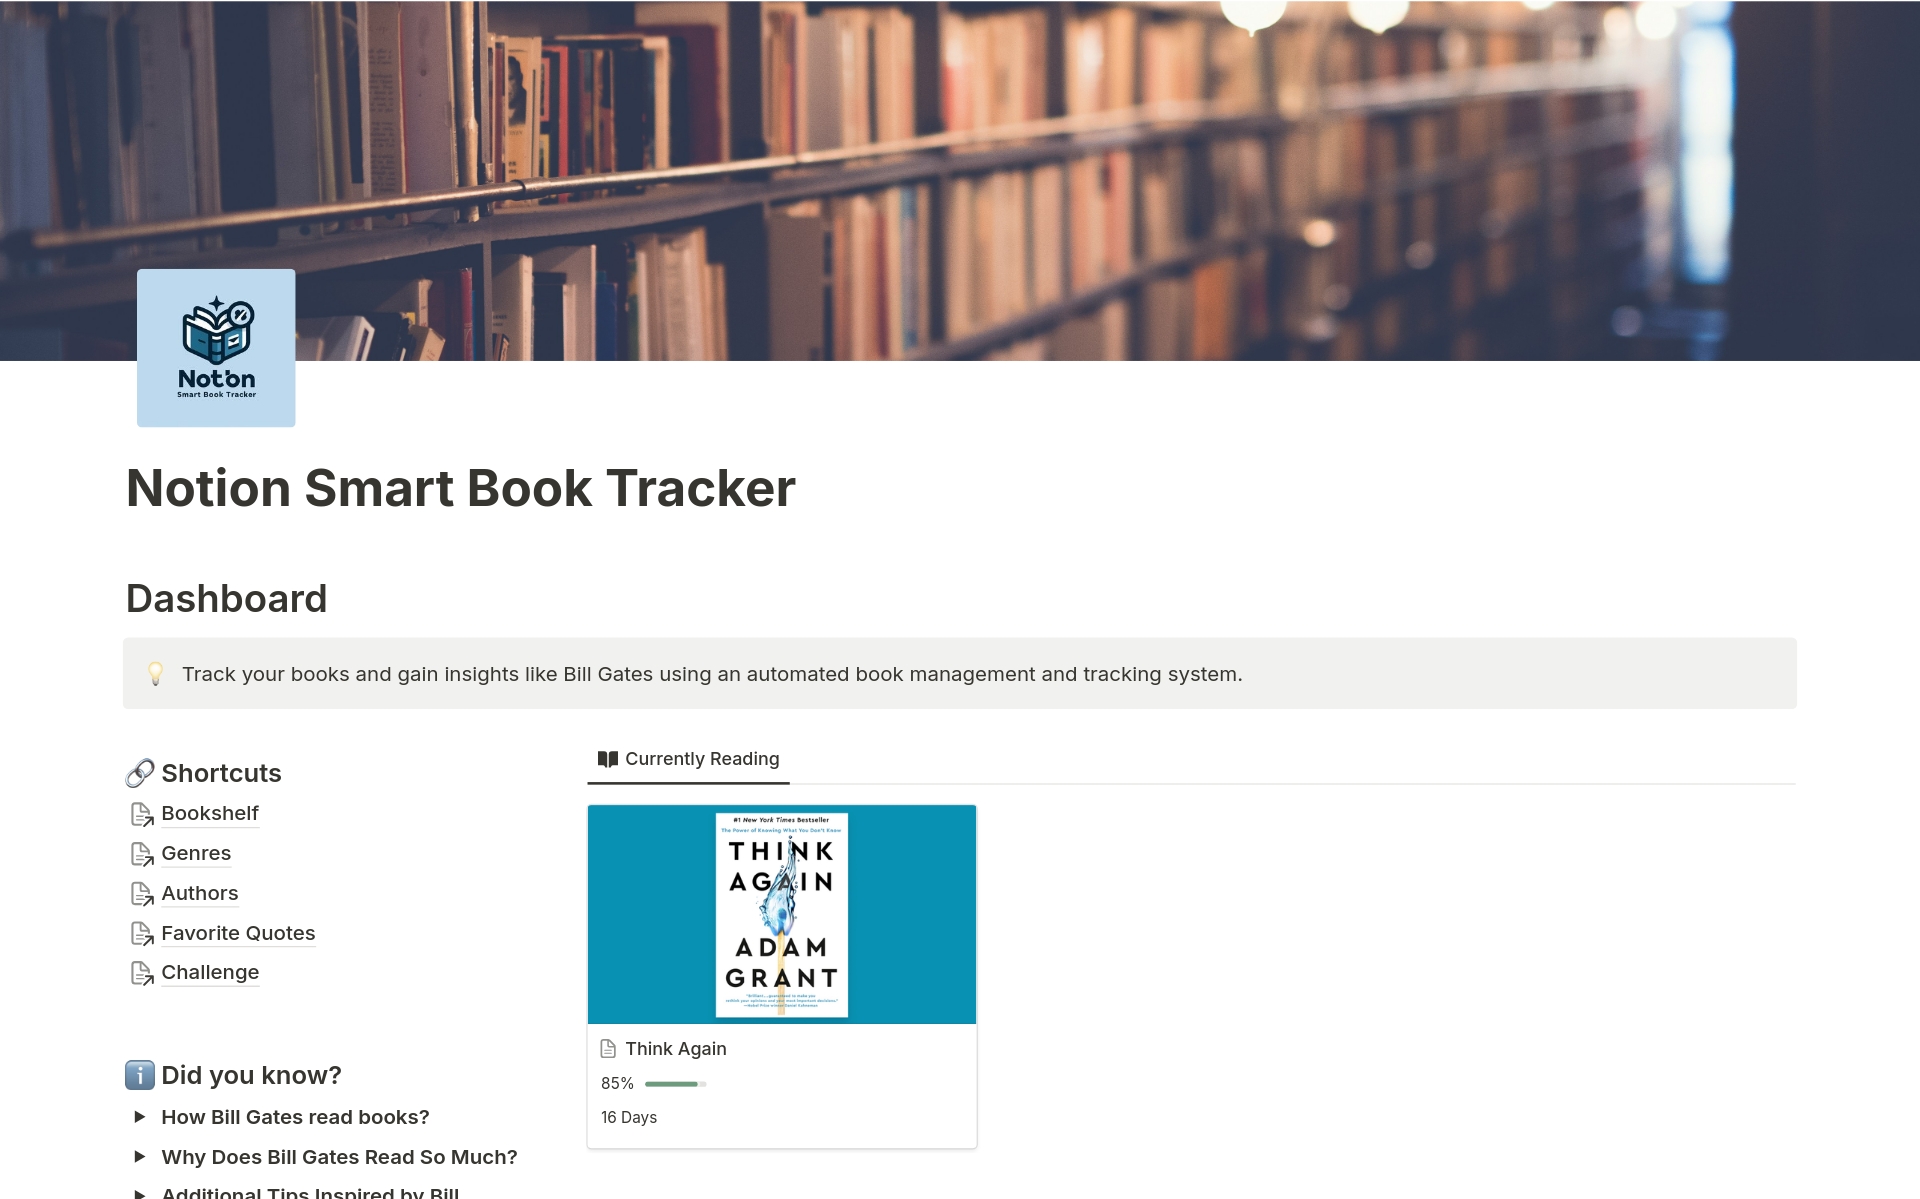 Track your books and gain insights like Bill Gates using an automated book management and tracking system.